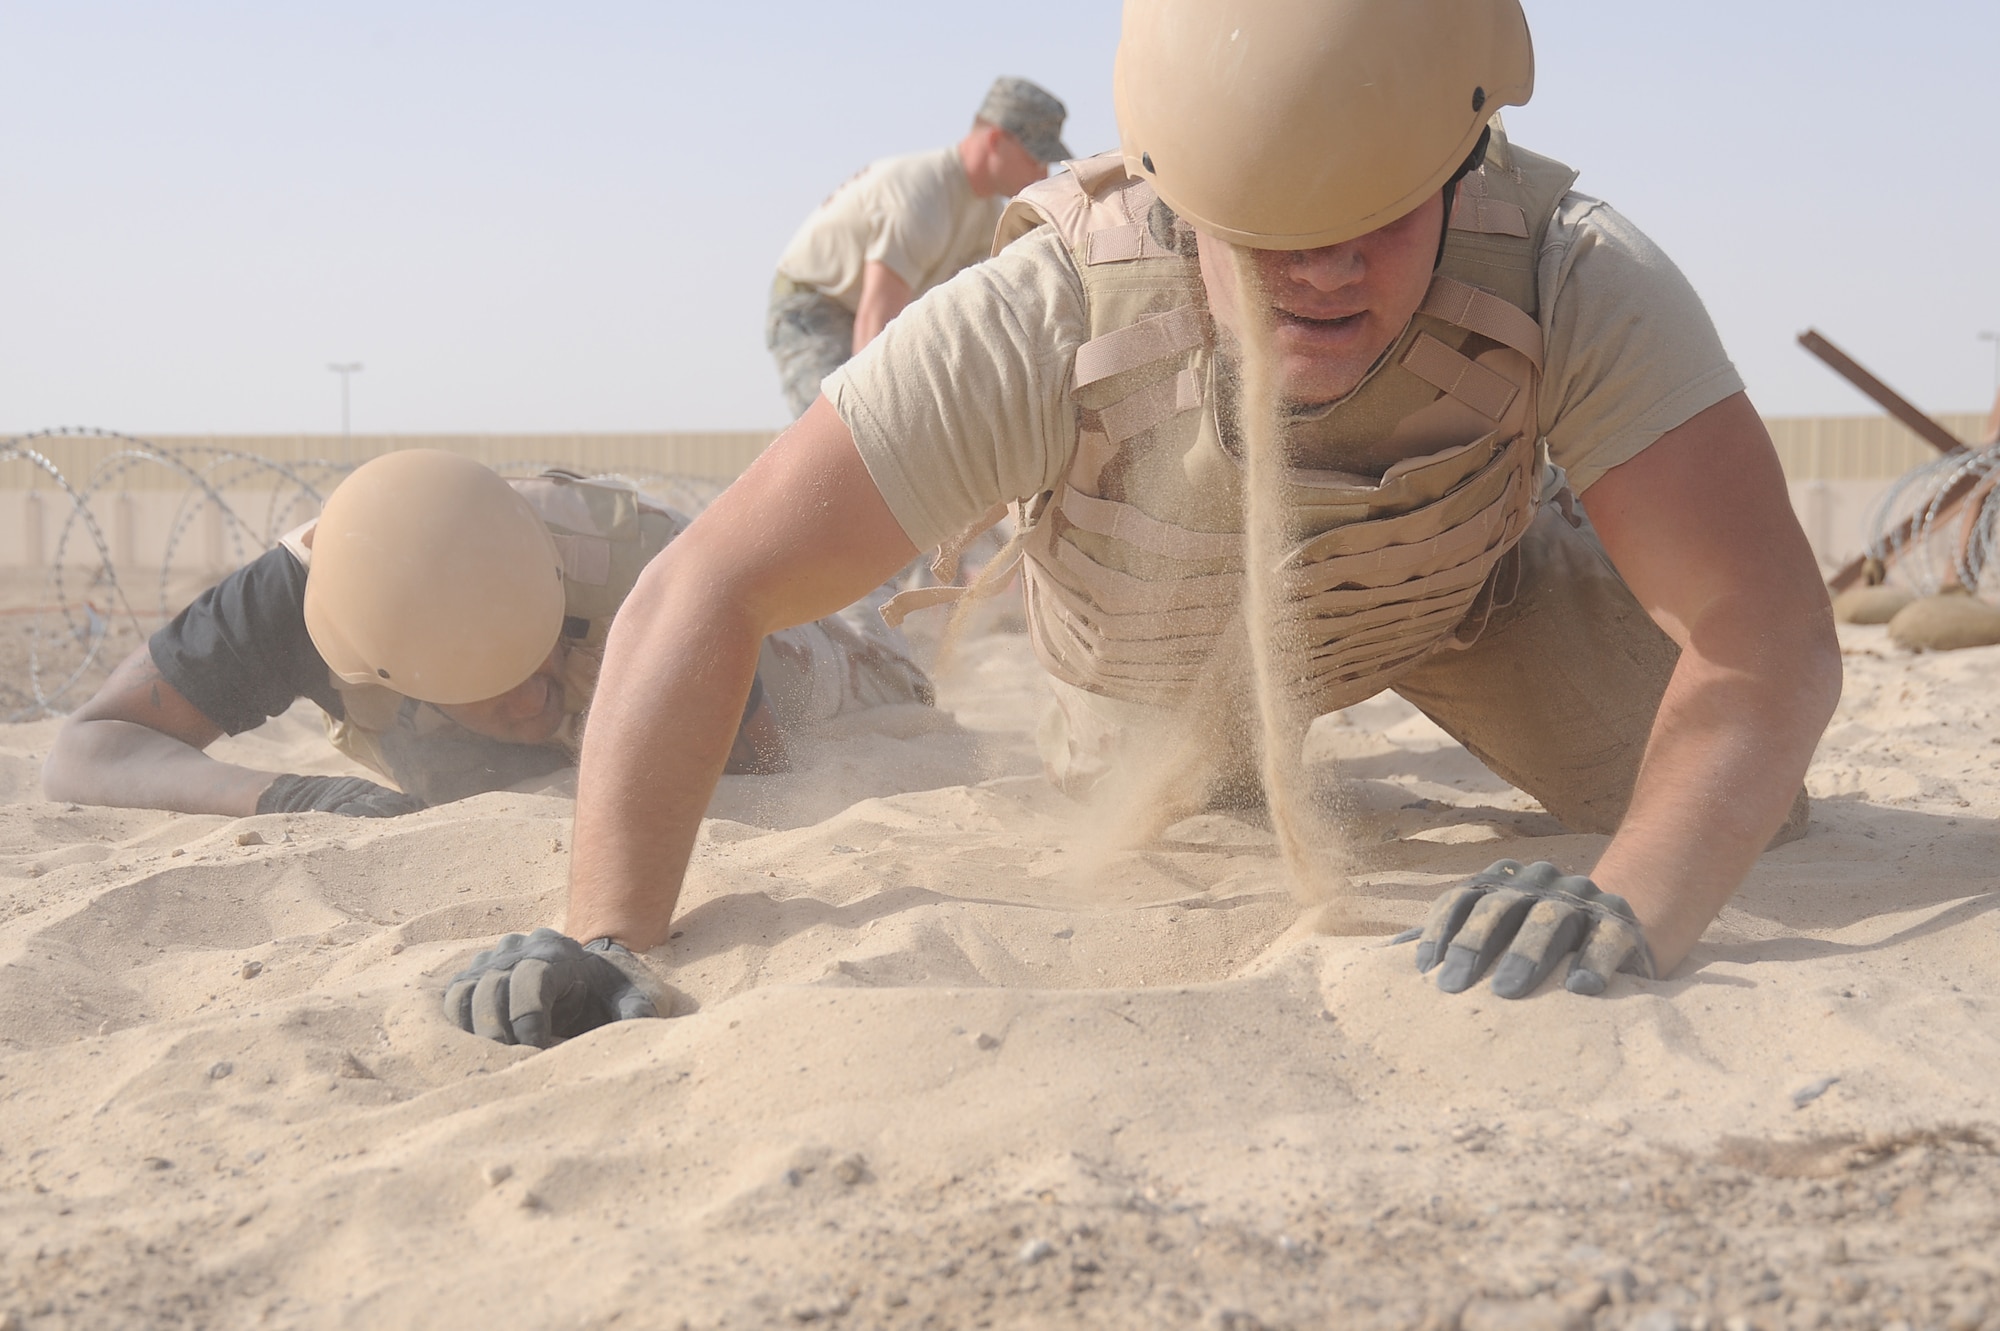 Sand falls from the helmet of Airman 1st Class Bryan Rozier, 380th Expeditionary Civil Engineer Squadron, as he gets up after low crawling 25ft through a sandpit on a Defender Challenge course, April 25 at an undisclosed location in Southwest Asia. Teams from different units ran the course, testing stamina, strength and brain power. Airman Rozier is deployed from Andrews AFB, Wash. D.C. and hails from Savannah, Ga. (U.S. Air Force photo by Senior Airman Brian J. Ellis) (Released)